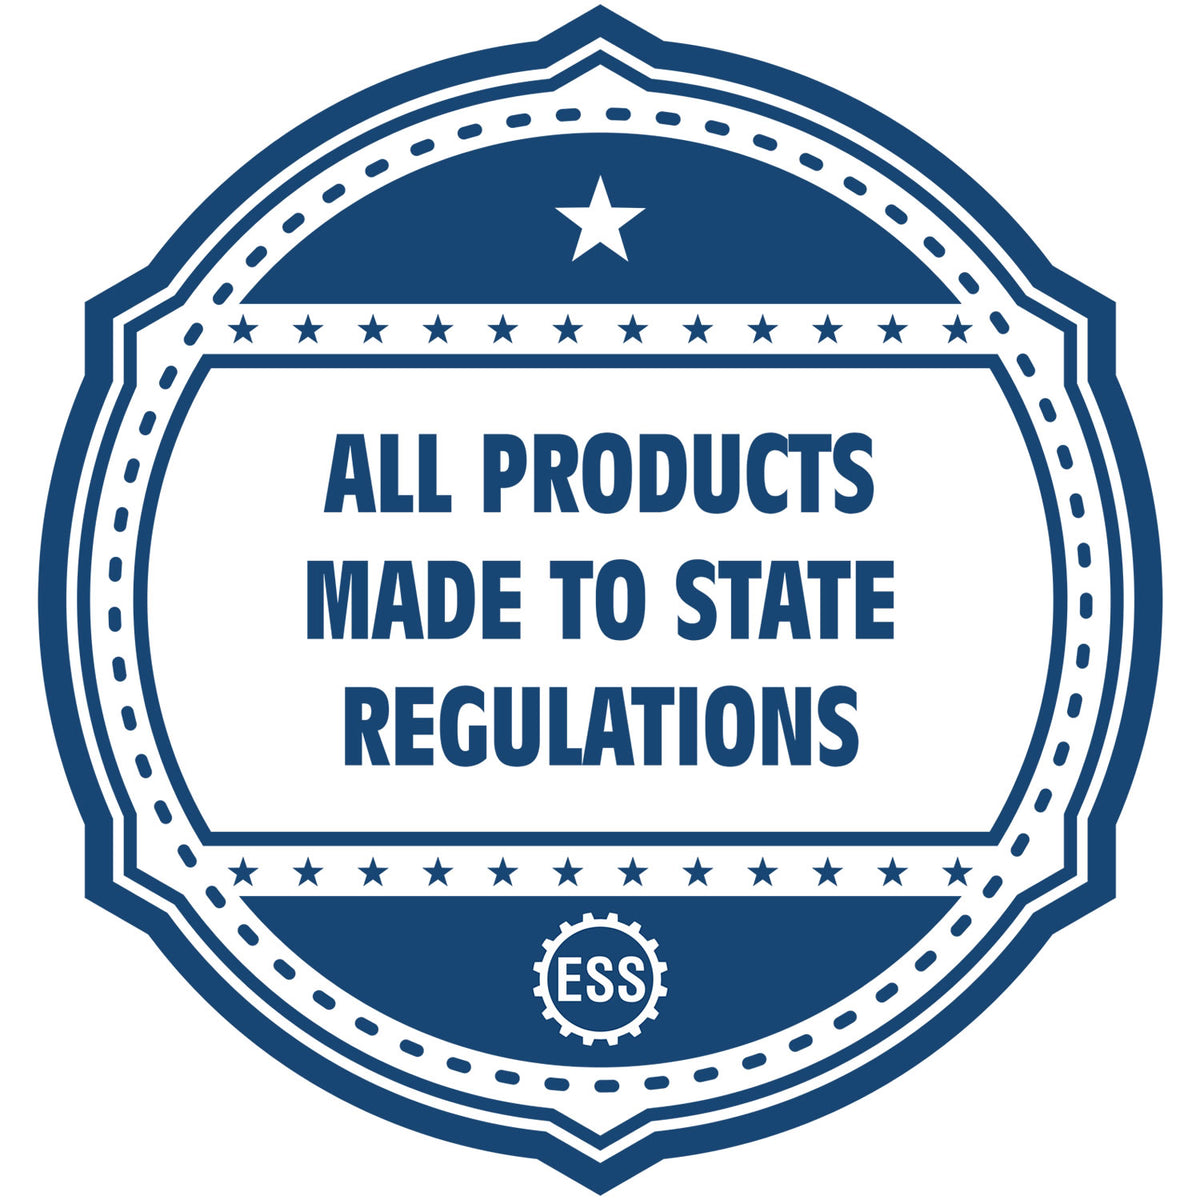 An icon or badge element for the Handheld West Virginia Professional Engineer Embosser showing that this product is made in compliance with state regulations.